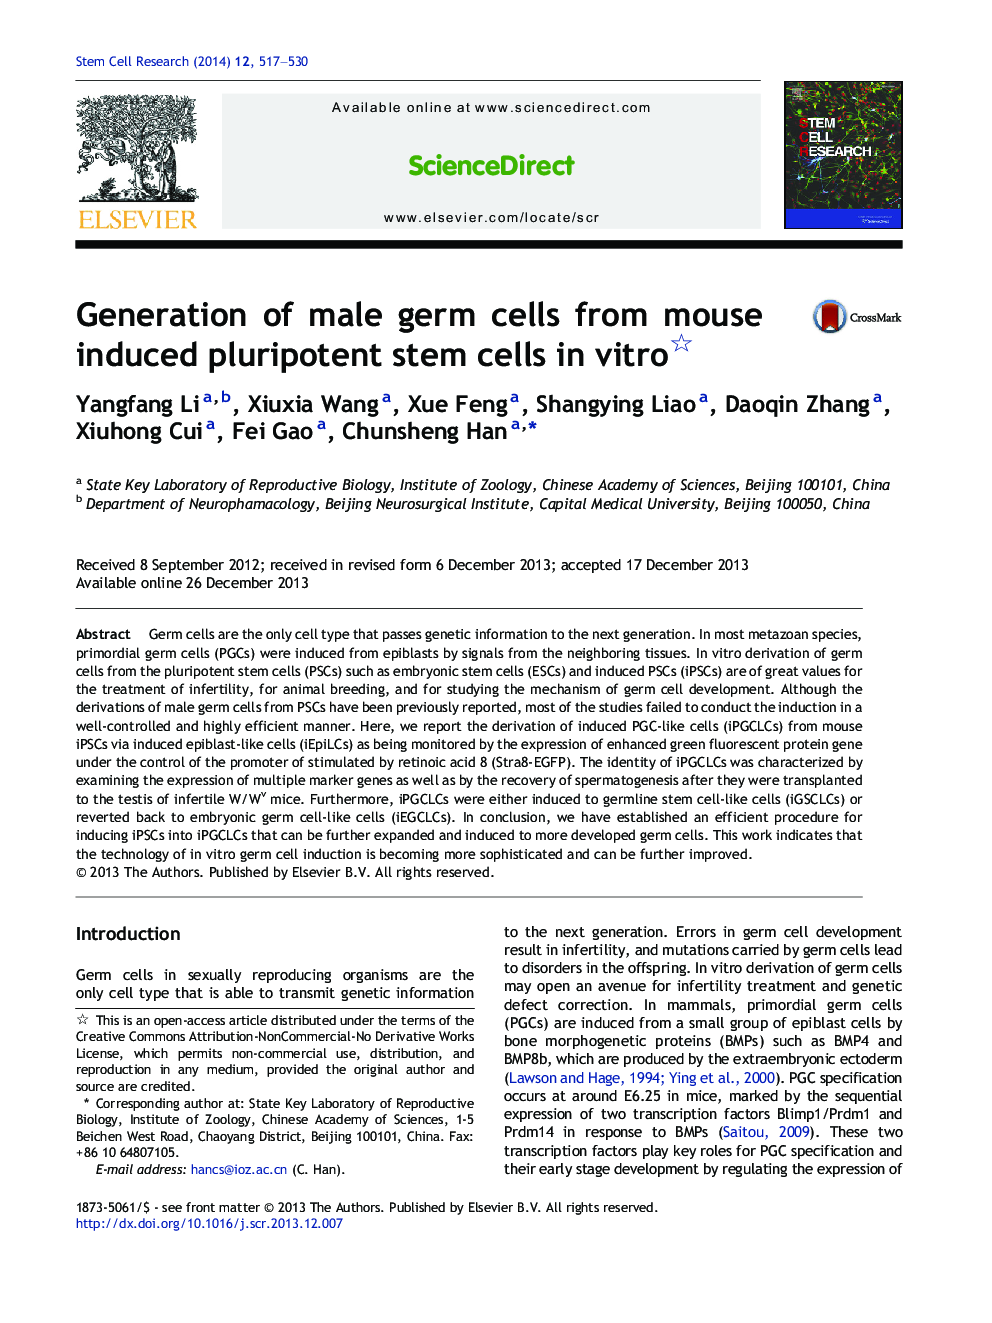 Generation of male germ cells from mouse induced pluripotent stem cells in vitro 